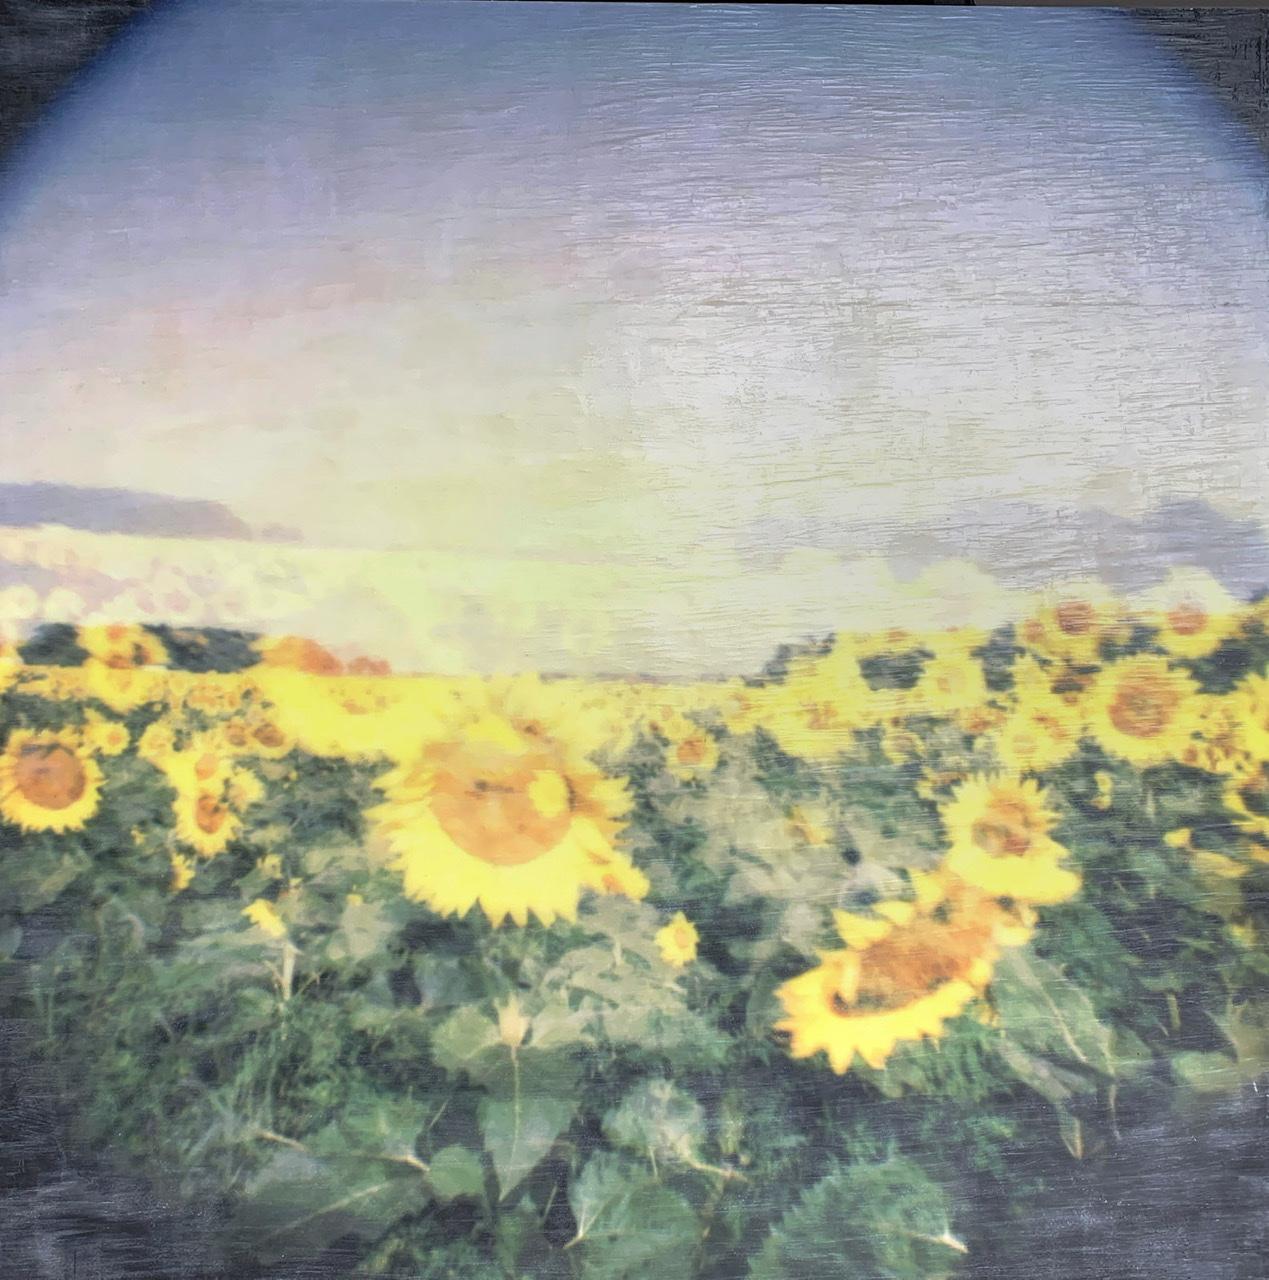 "Ode to the Sun", Summer beauty. Encaustic wax & polaroid on wood board. 